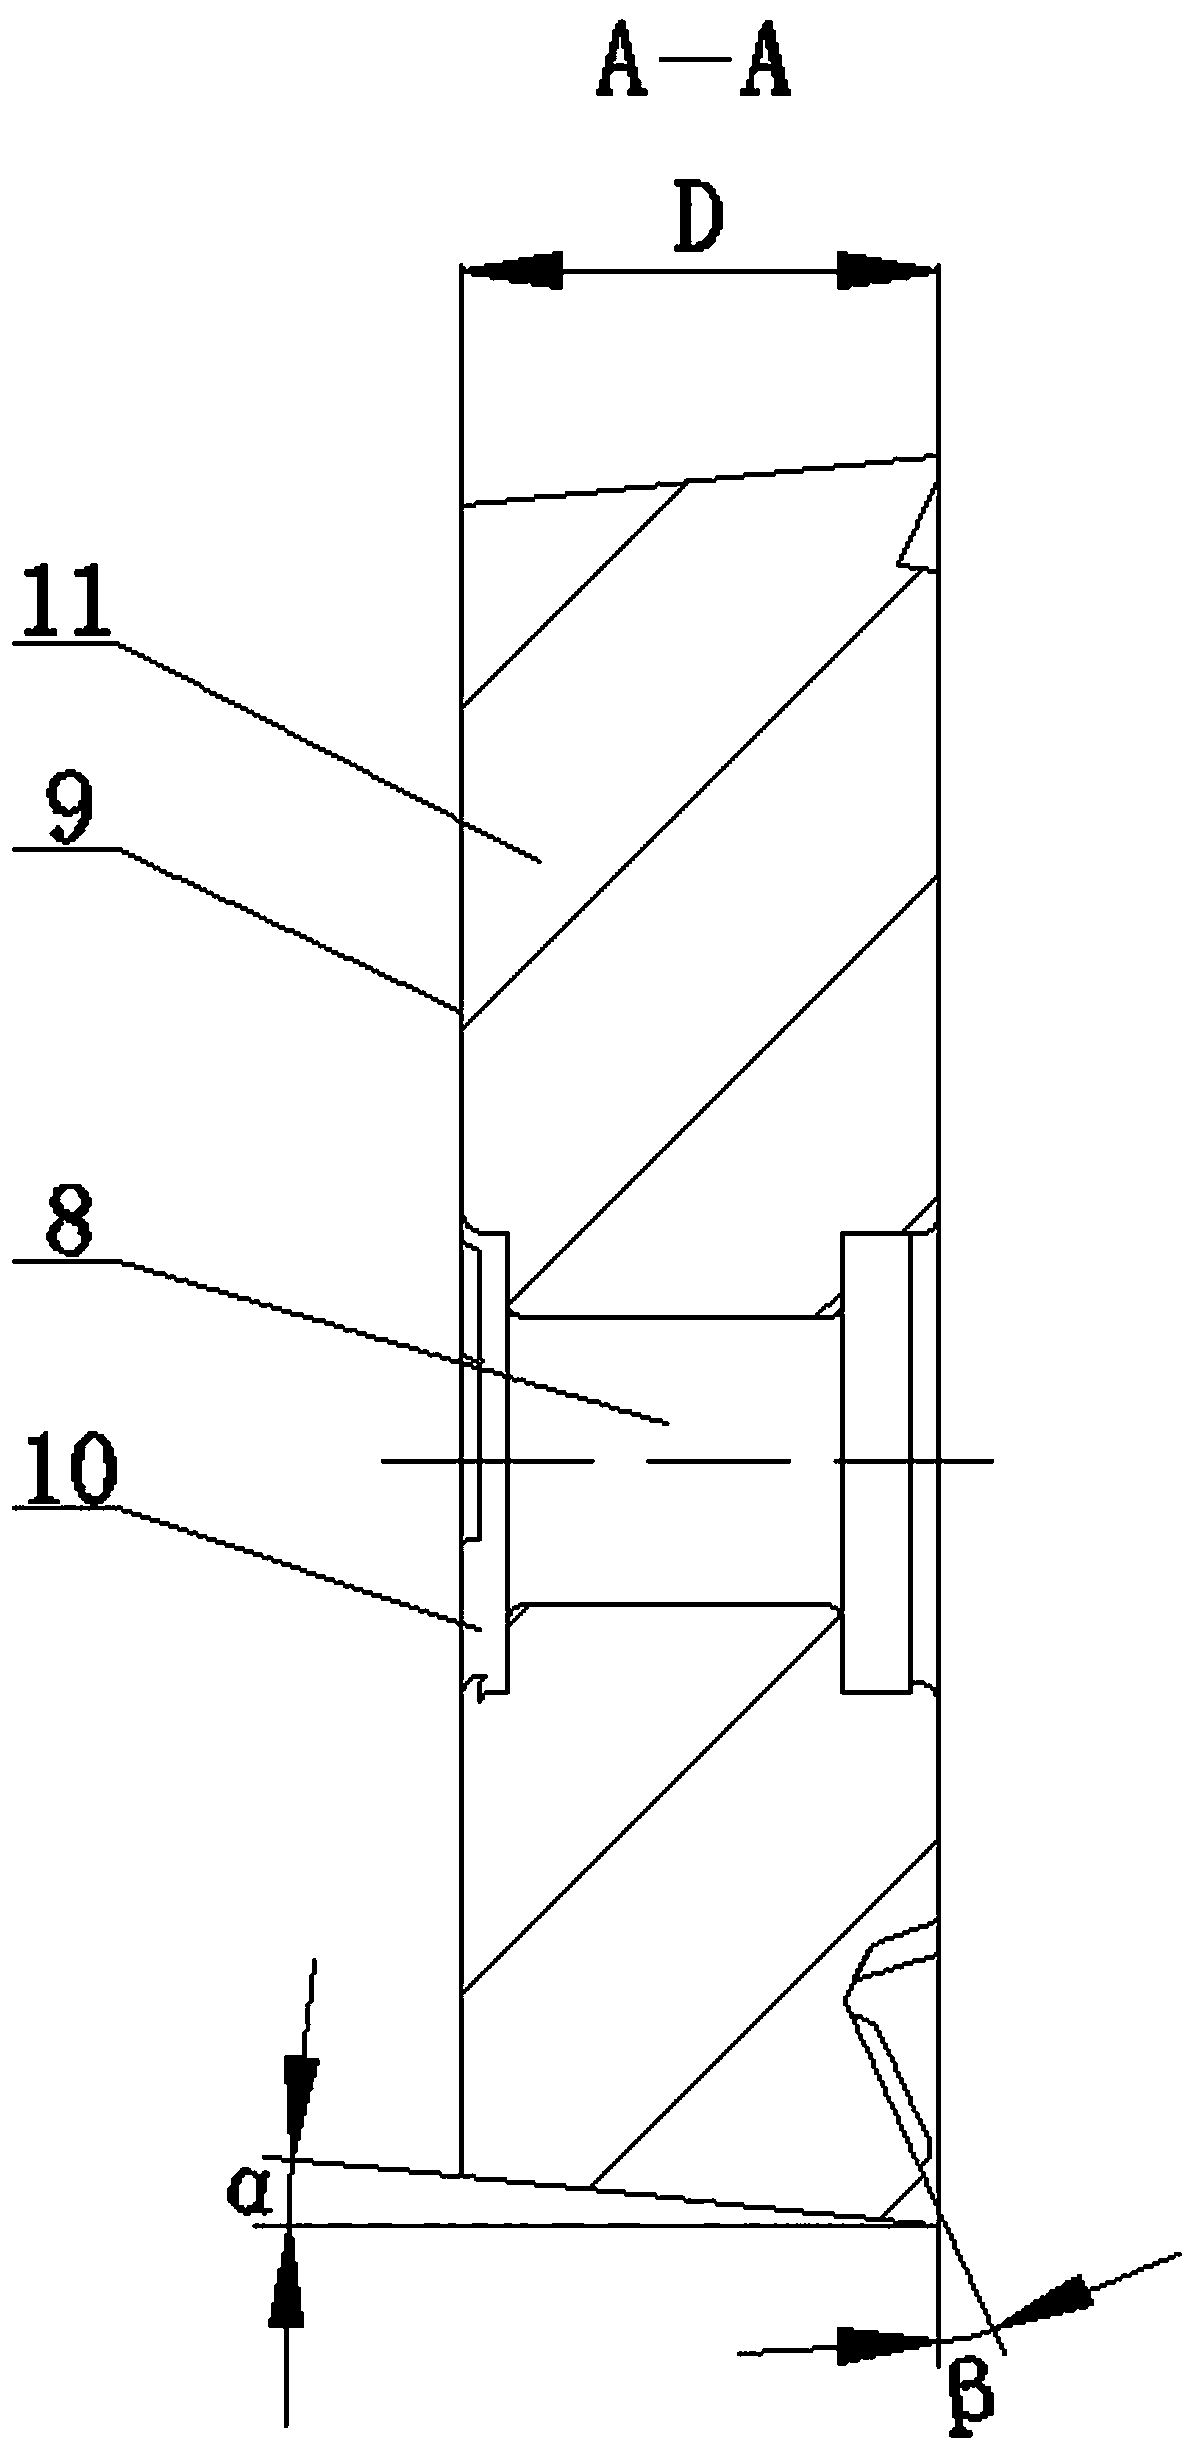 A compound insert for turning and milling with wave-shaped chip guide for heavy-duty cutting